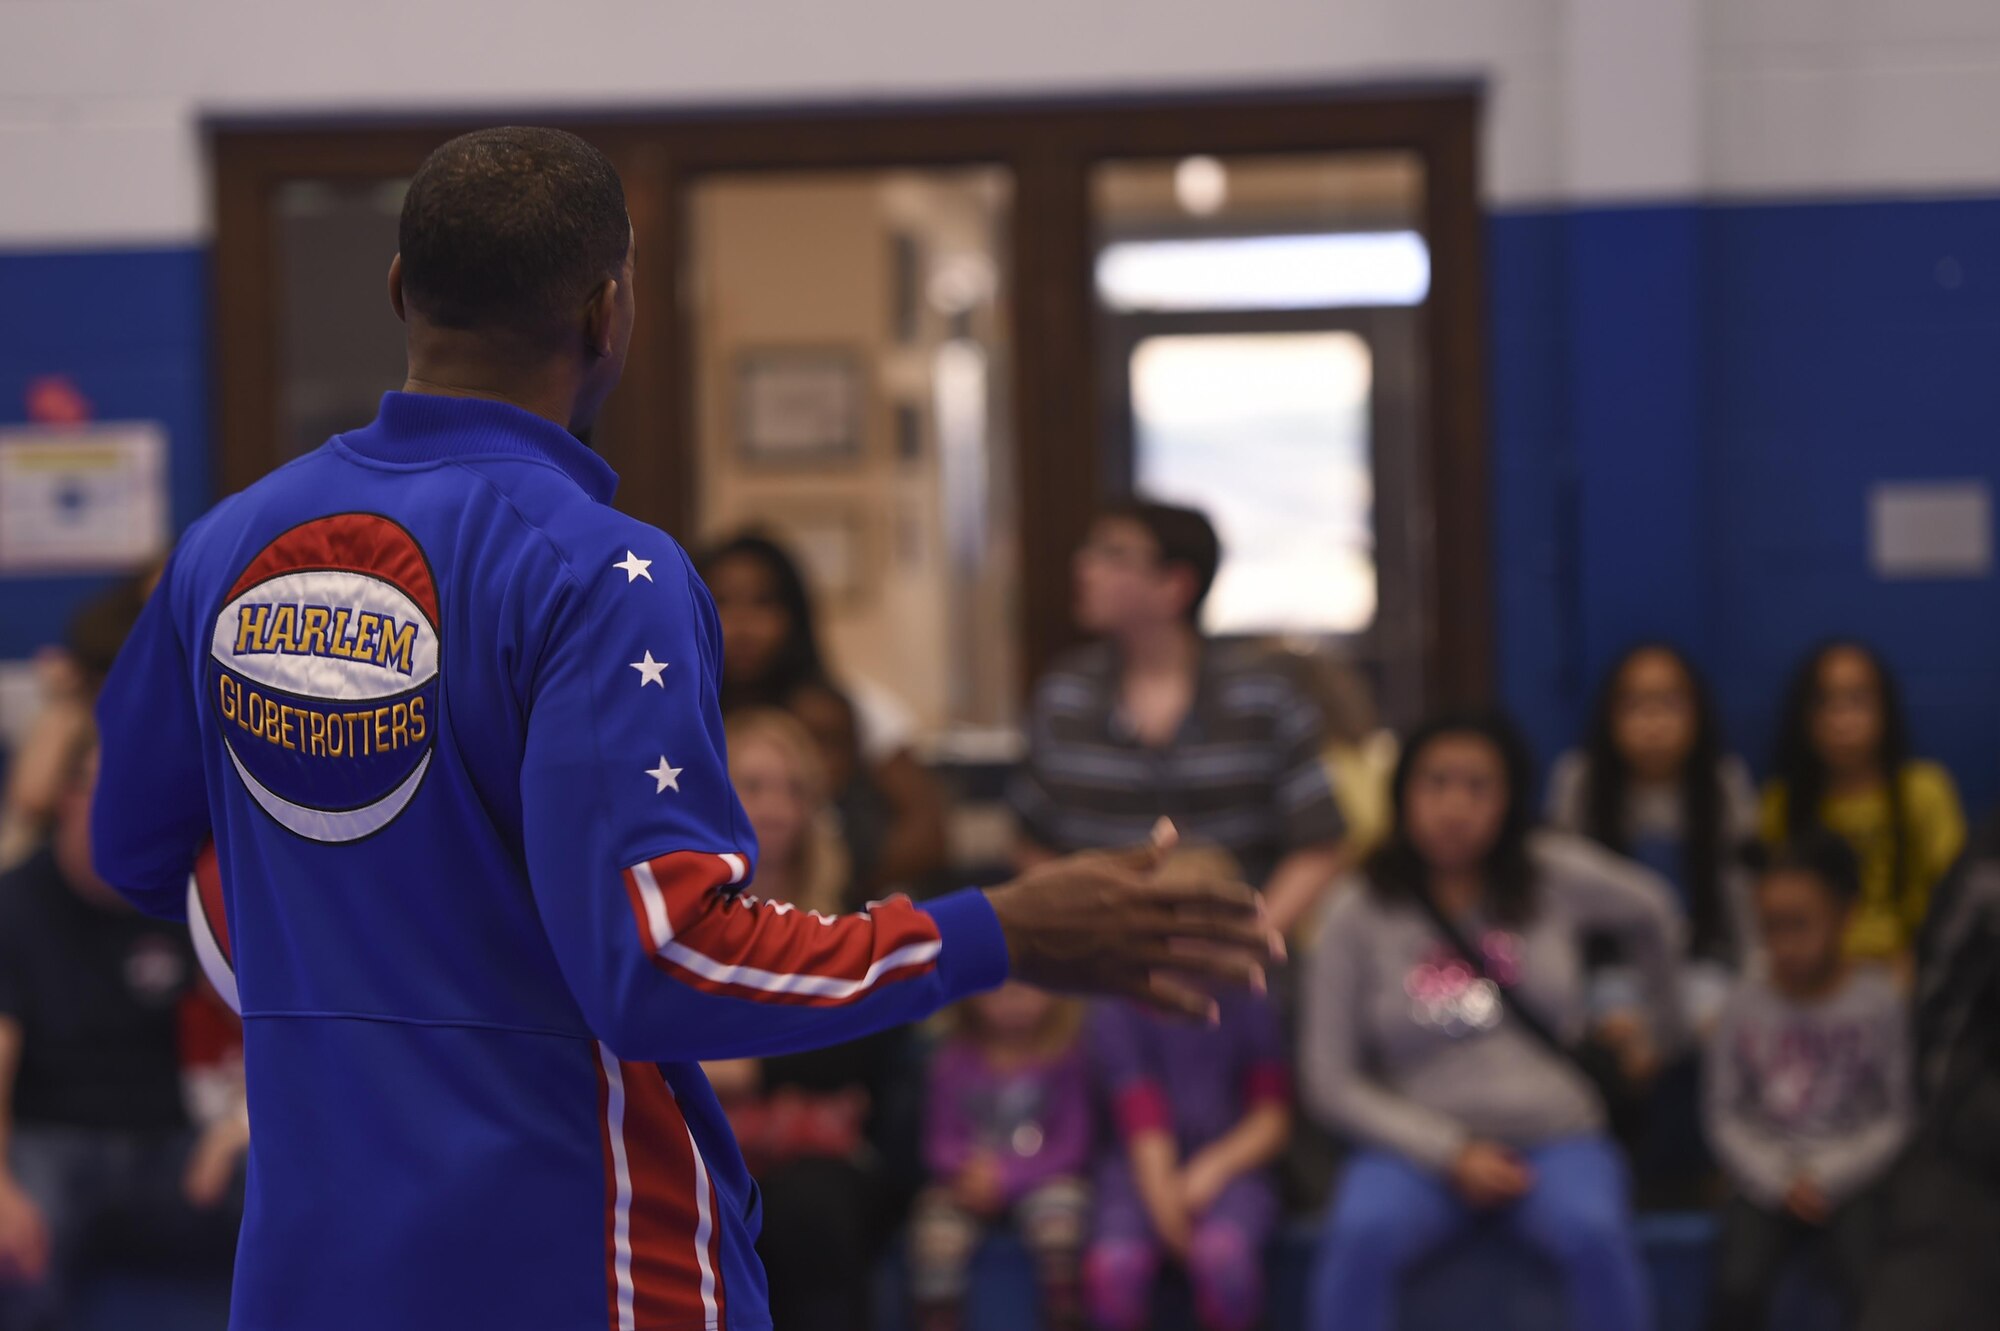 Anthony “Buckets” Blakes, a Harlem Globetrotters point guard, explains the history of his team to a group of military families, Jan. 20, 2017, at the Little Rock Air Force Base Youth Center, Ark. The basketball player and his teammates will perform in North Little Rock, Ark., Jan. 31, 2017. (U.S. Air Force photo by Senior Airman Harry Brexel)